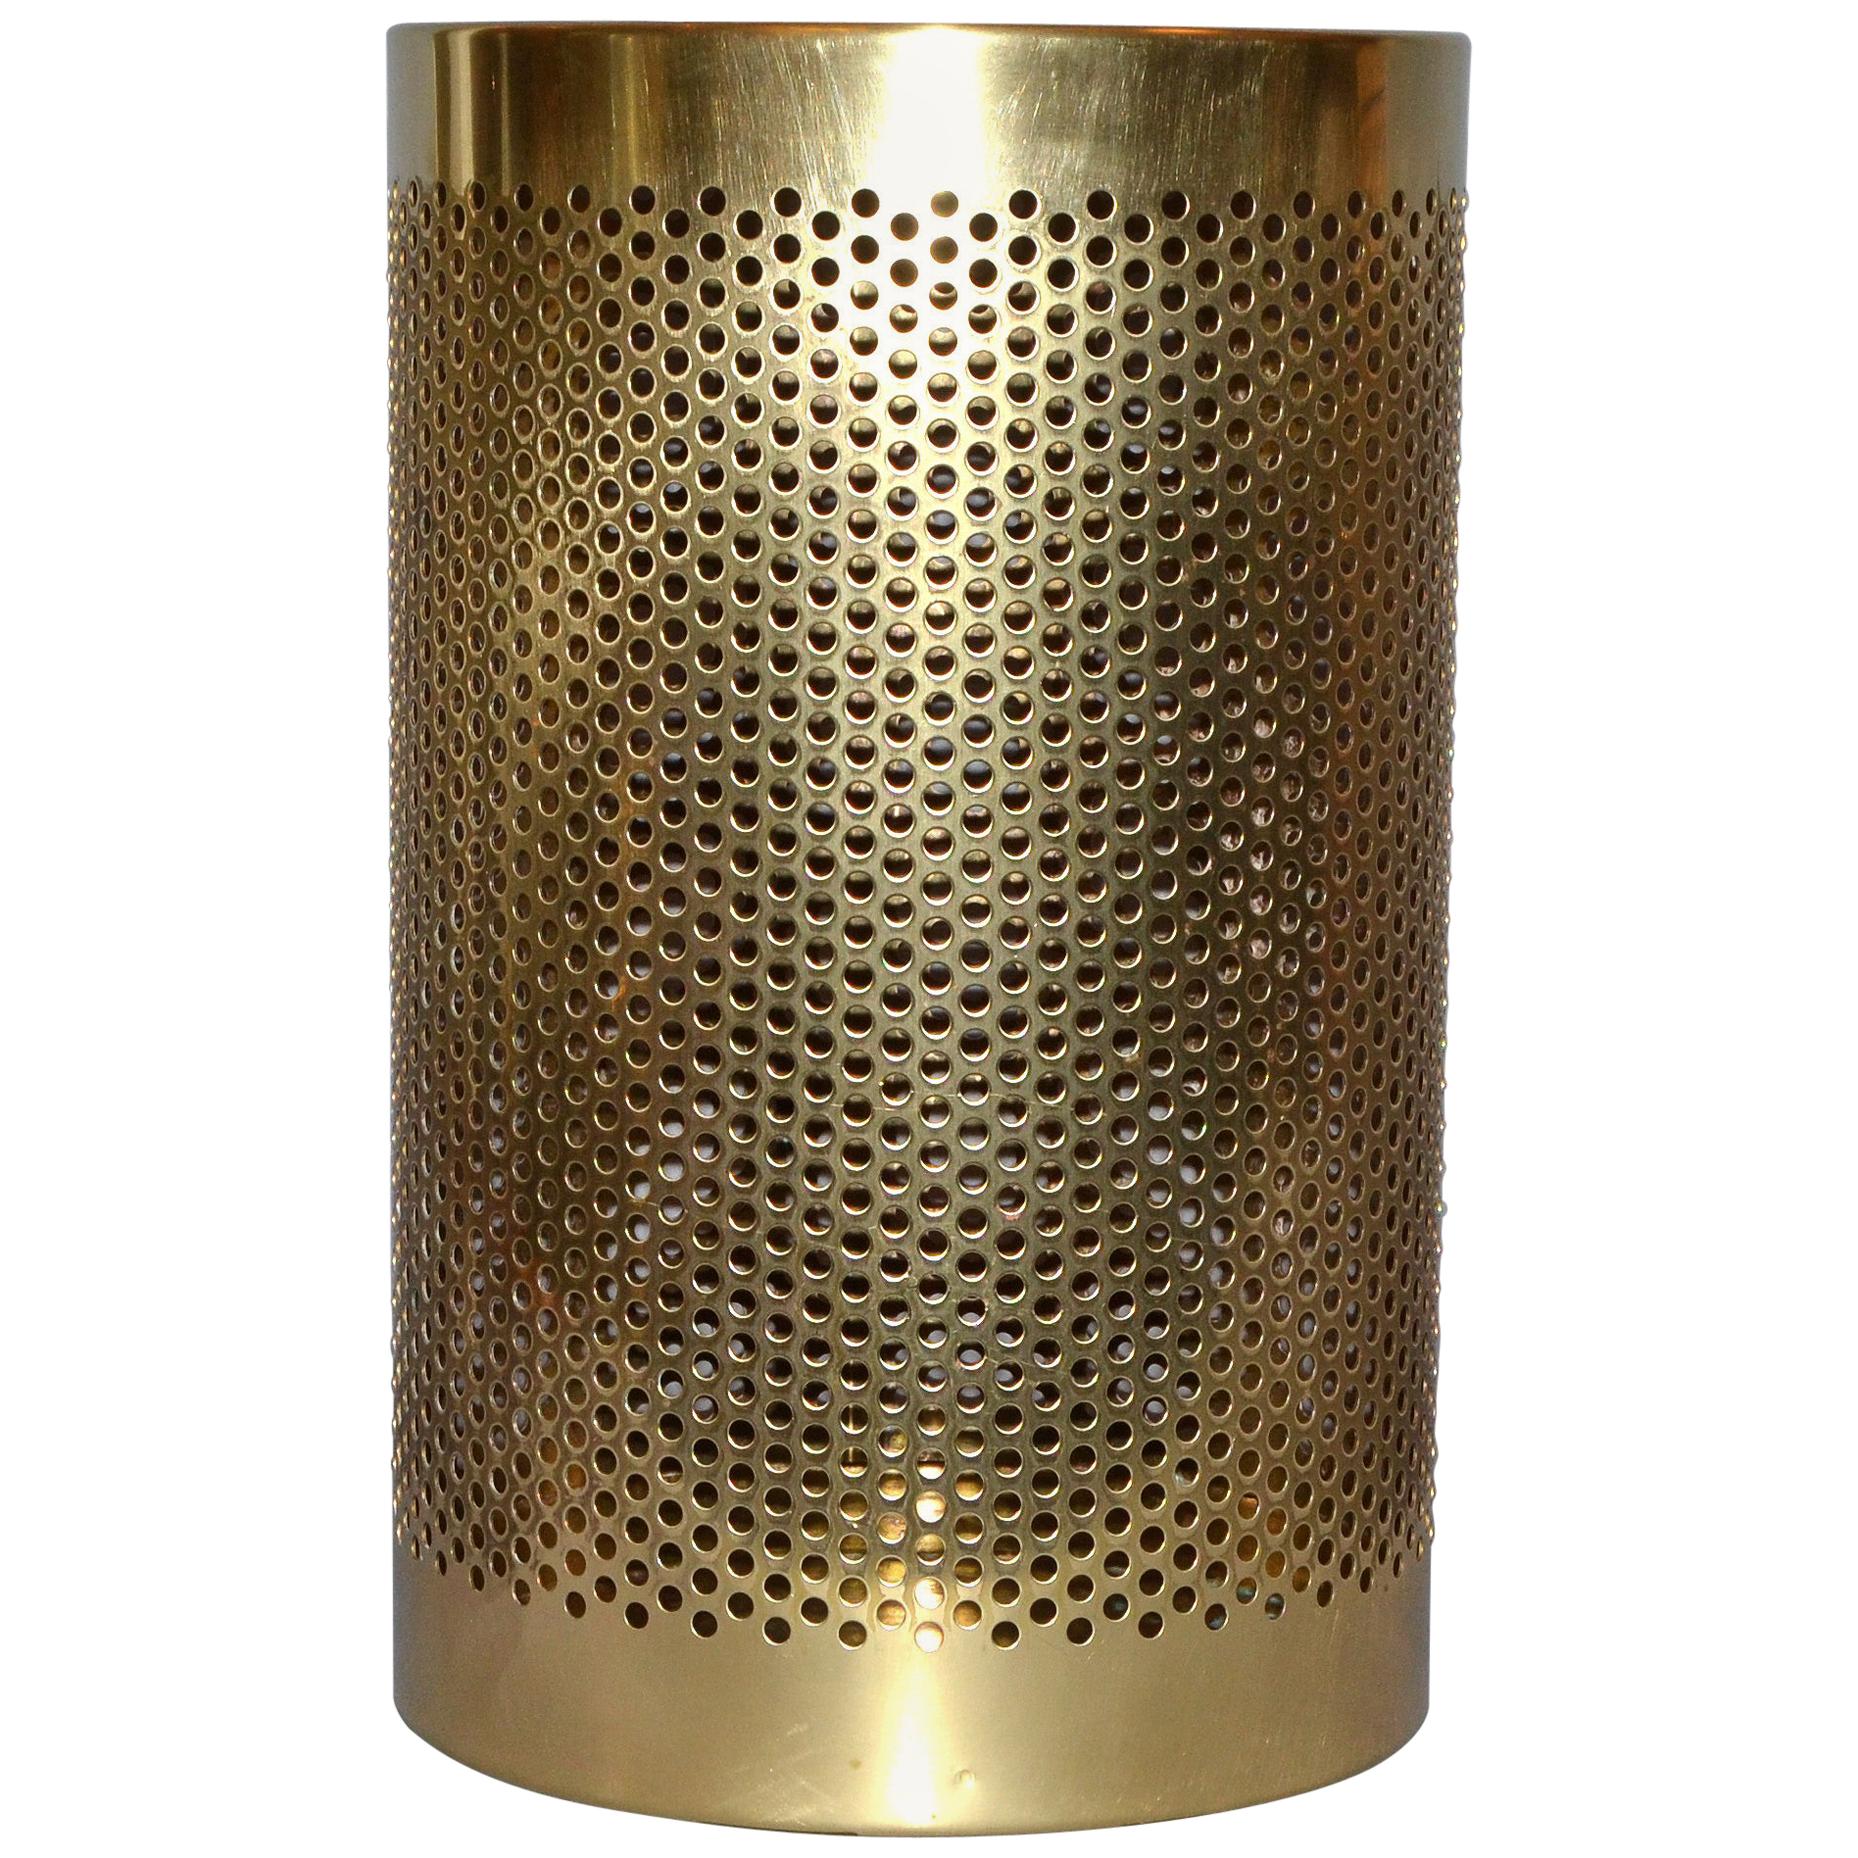 Vintage Frontgate Brass Italian Perforated Trash Waste Basket, Waste Can Italy